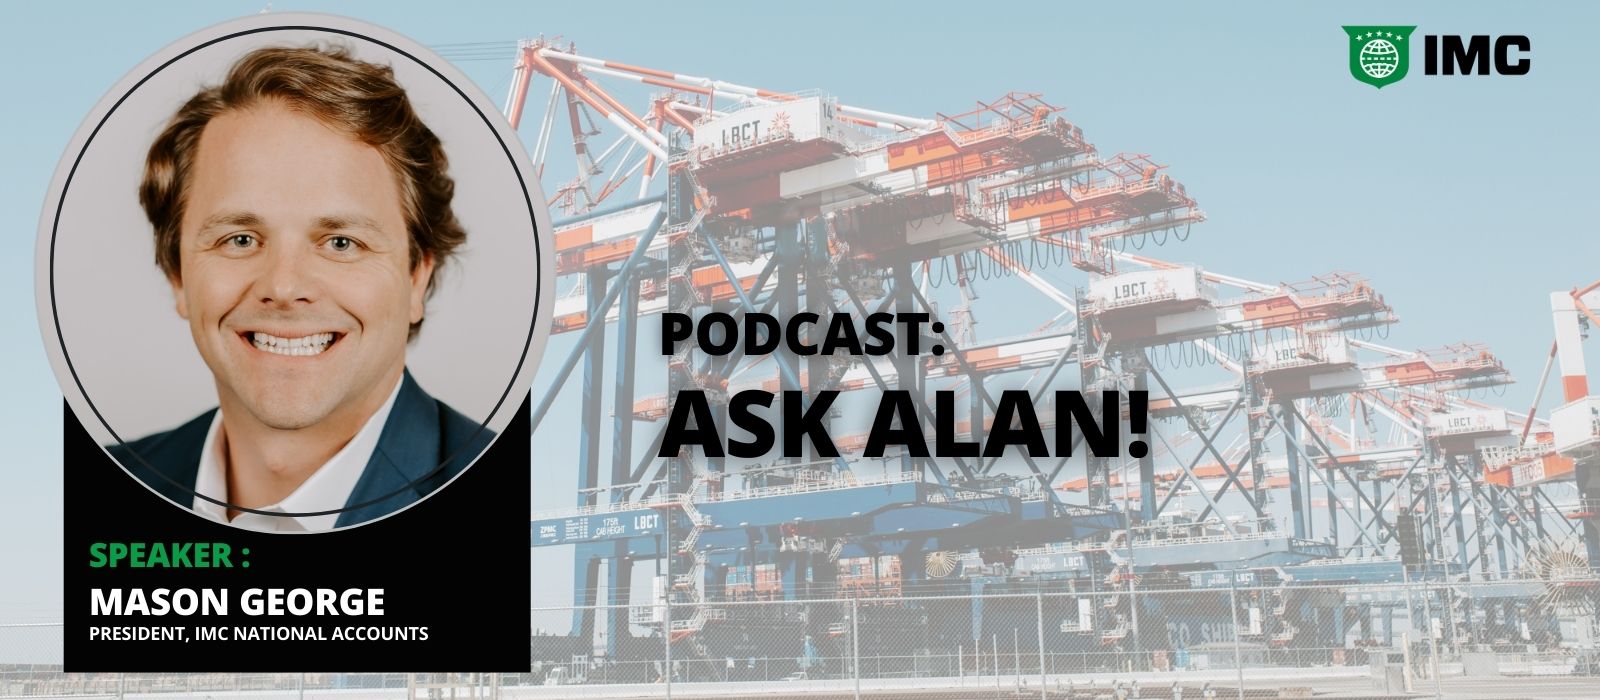 Mason George on the “Ask Alan!” Podcast